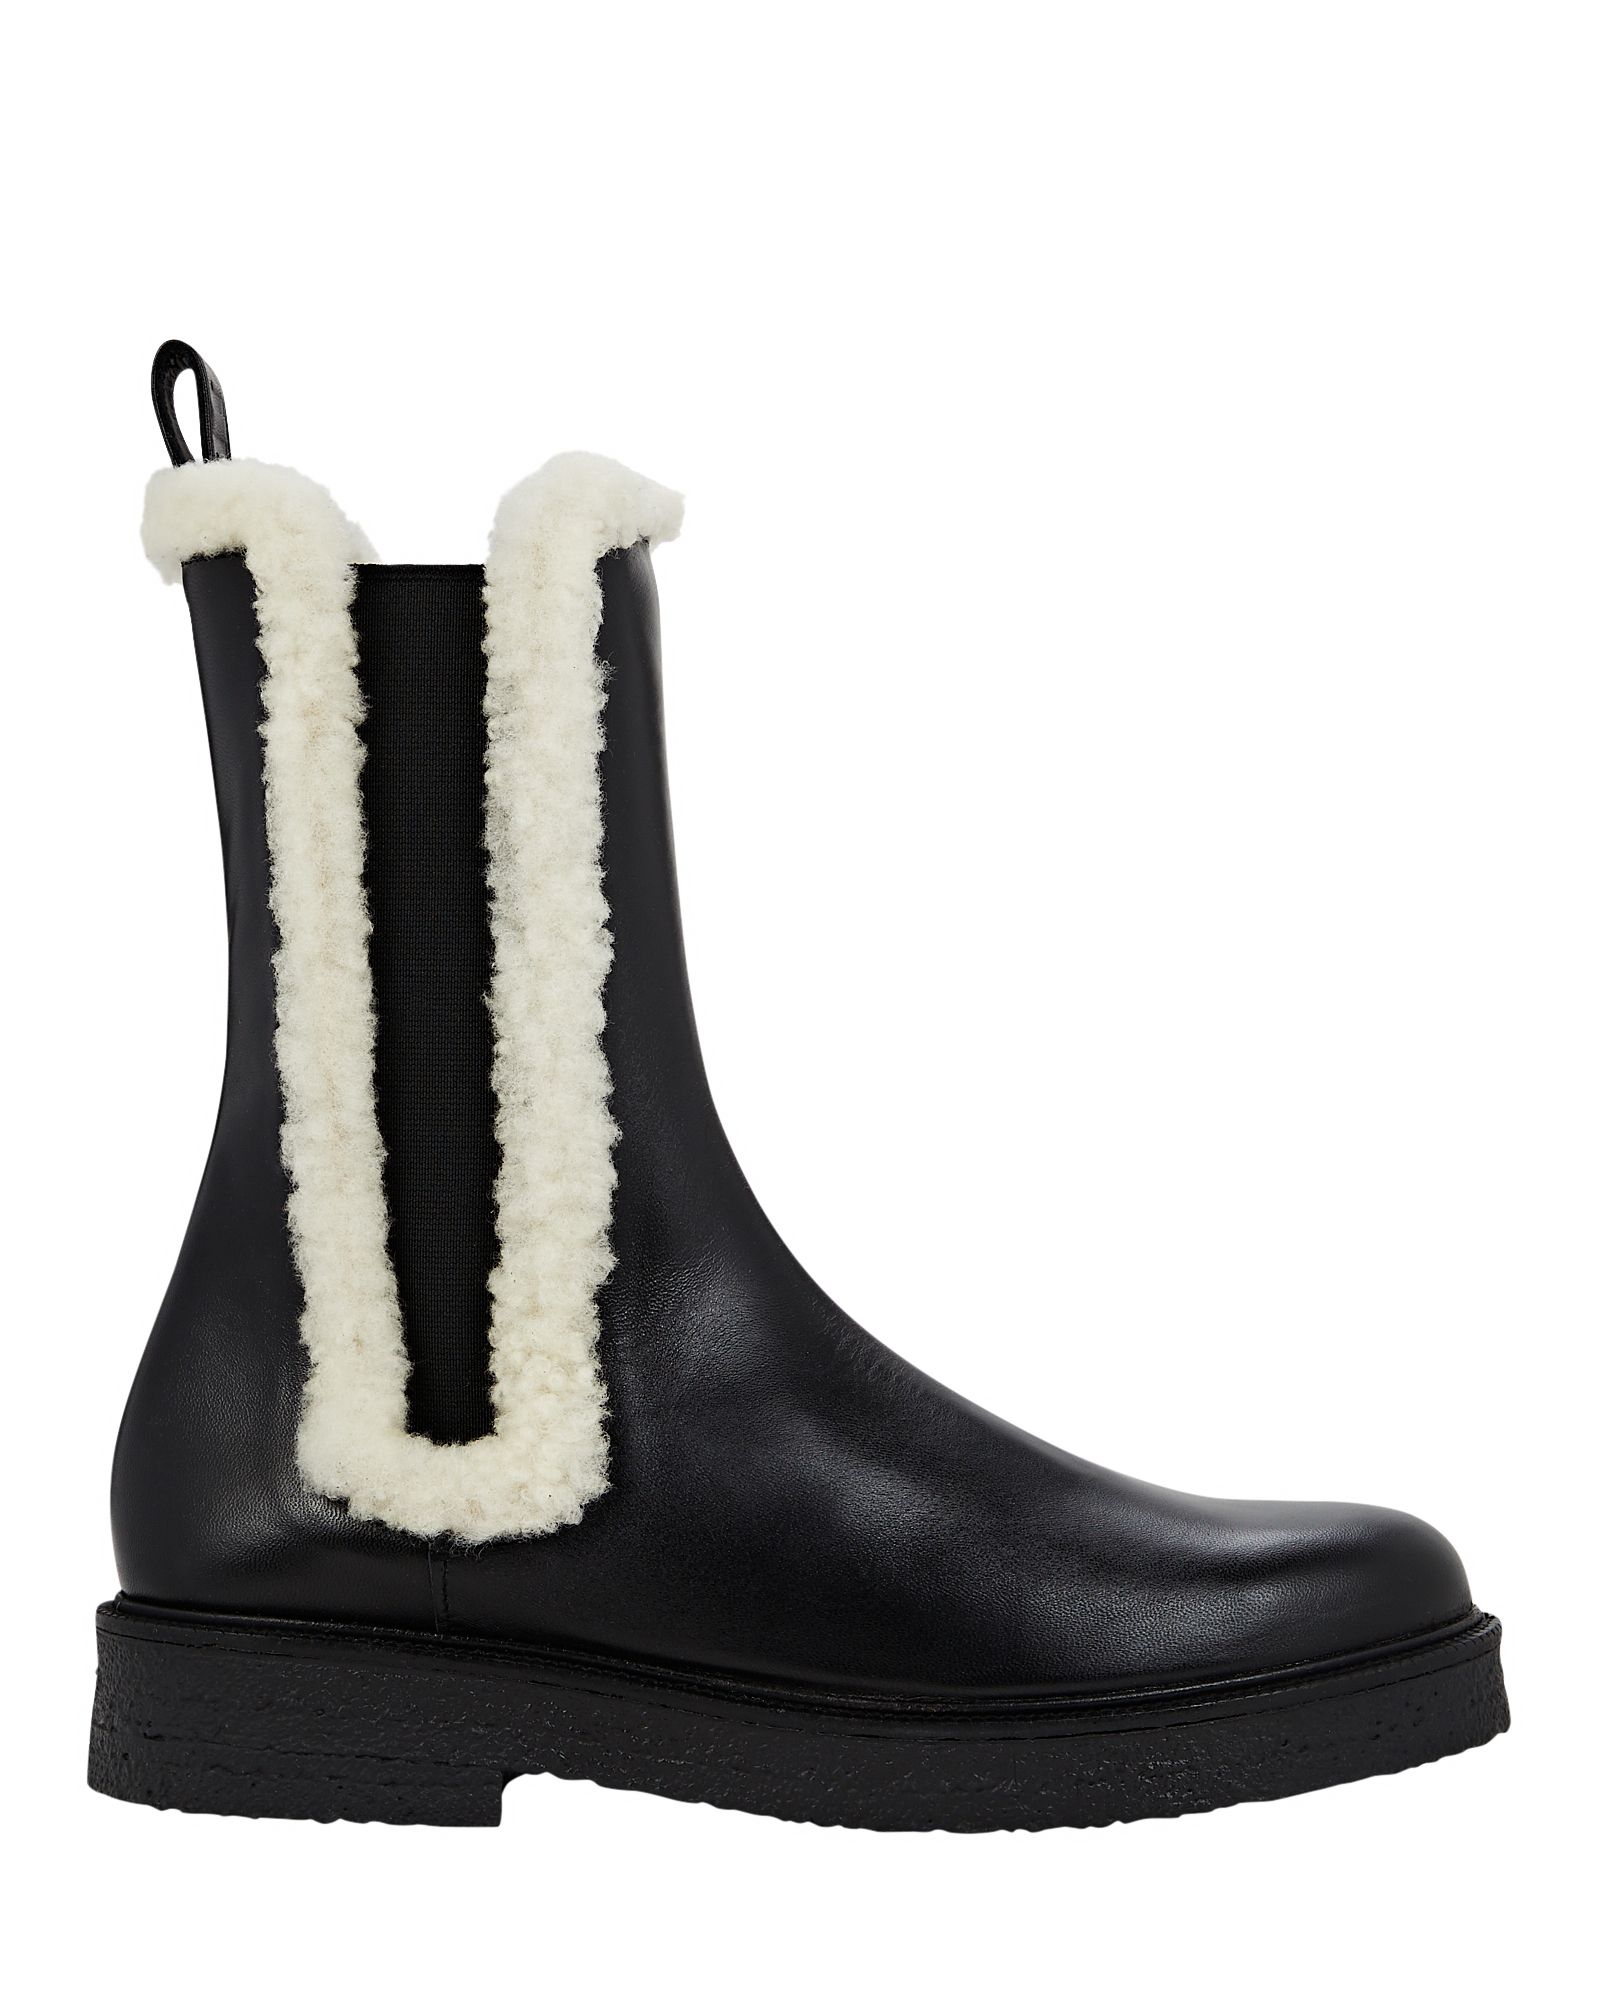 Palamino Shearling-Trimmed Leather Chelsea Boots | INTERMIX